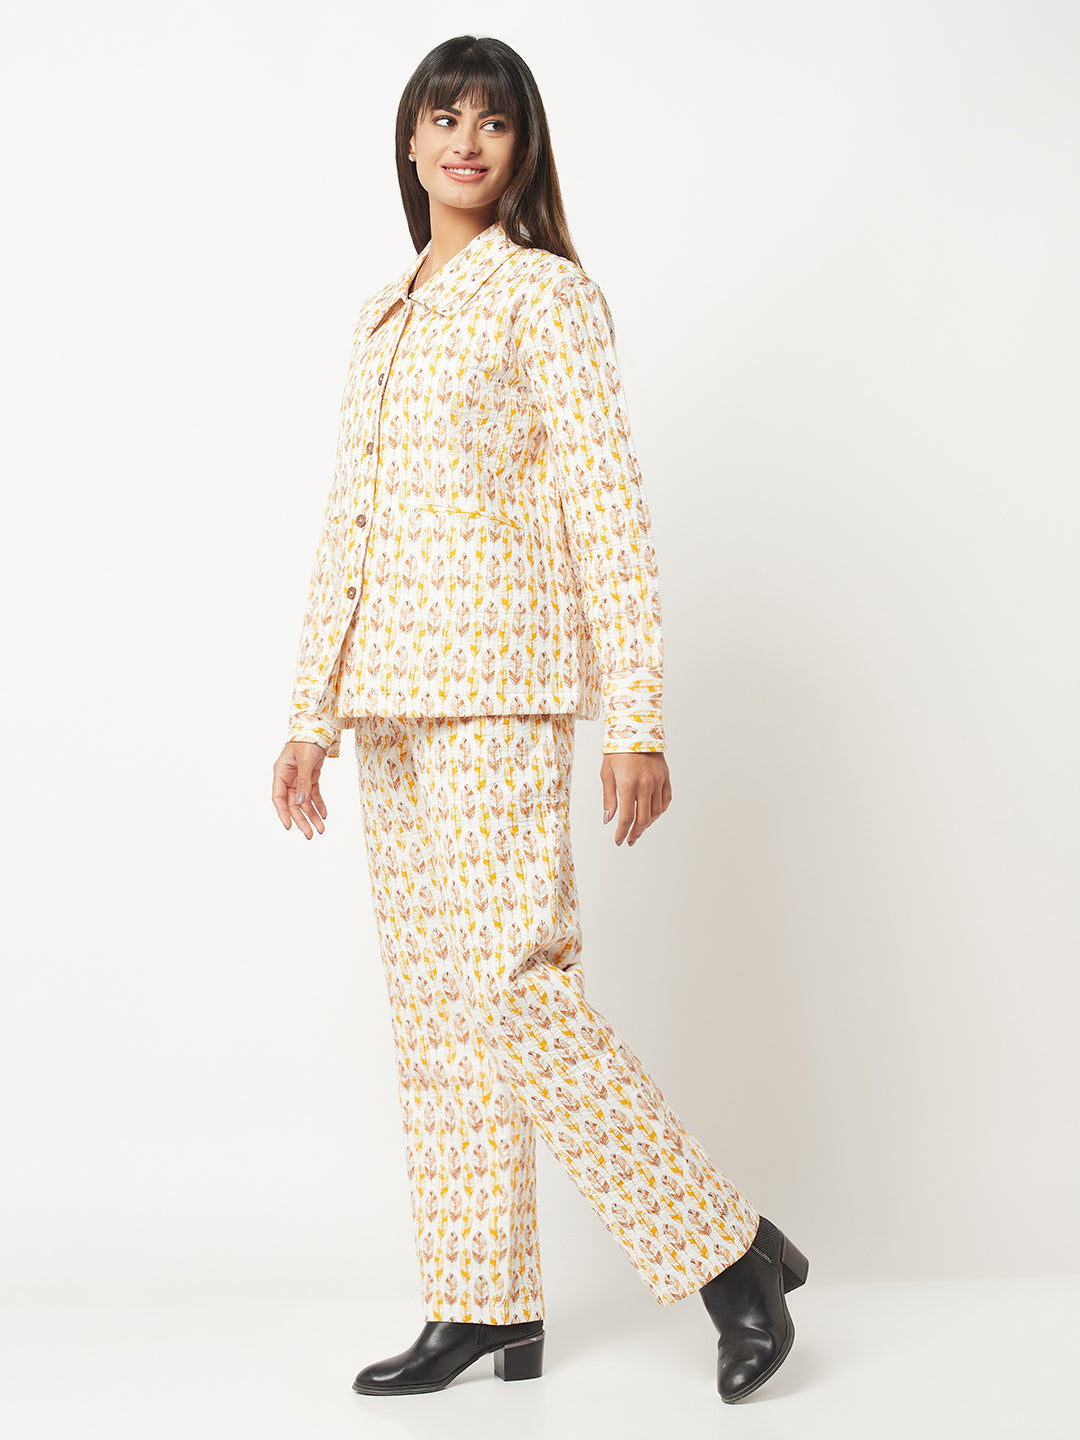 Yellow And White Quilted Co-ord Set